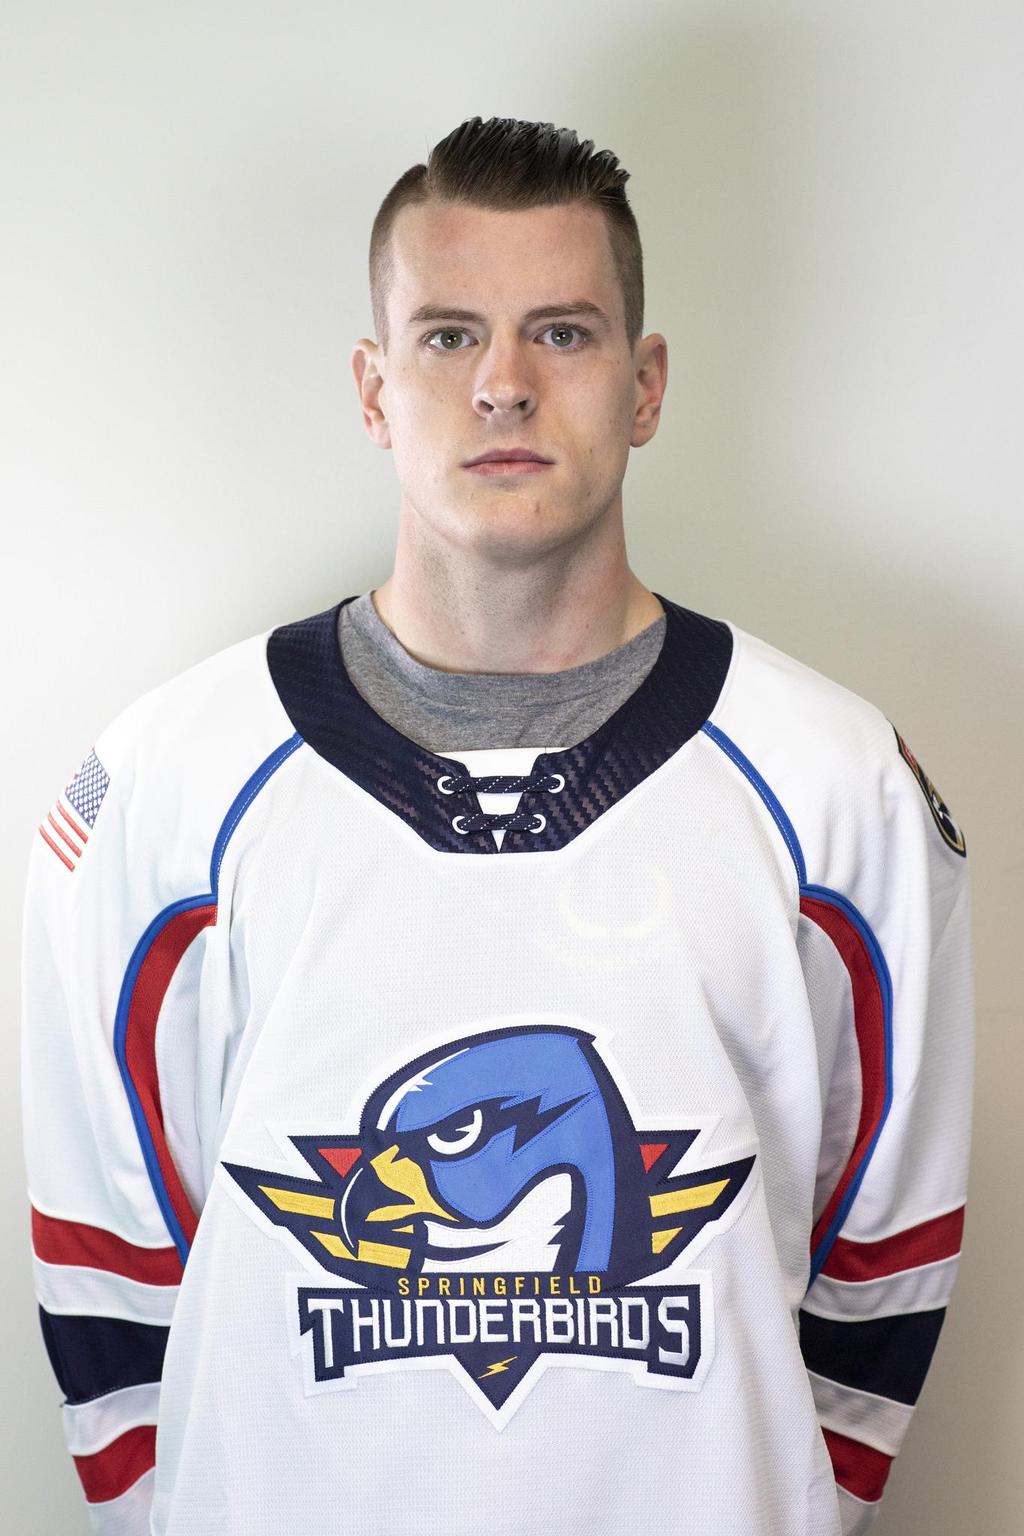 #47 Jacob MacDonald Position Defense Shoots: Left Born: February 26, 1993 - Portland, OR [25 yrs old] Height/Weight: 6 0, 208 lbs Draft: CBJ - signed to entry level deal in 2014 for $750,000 Season